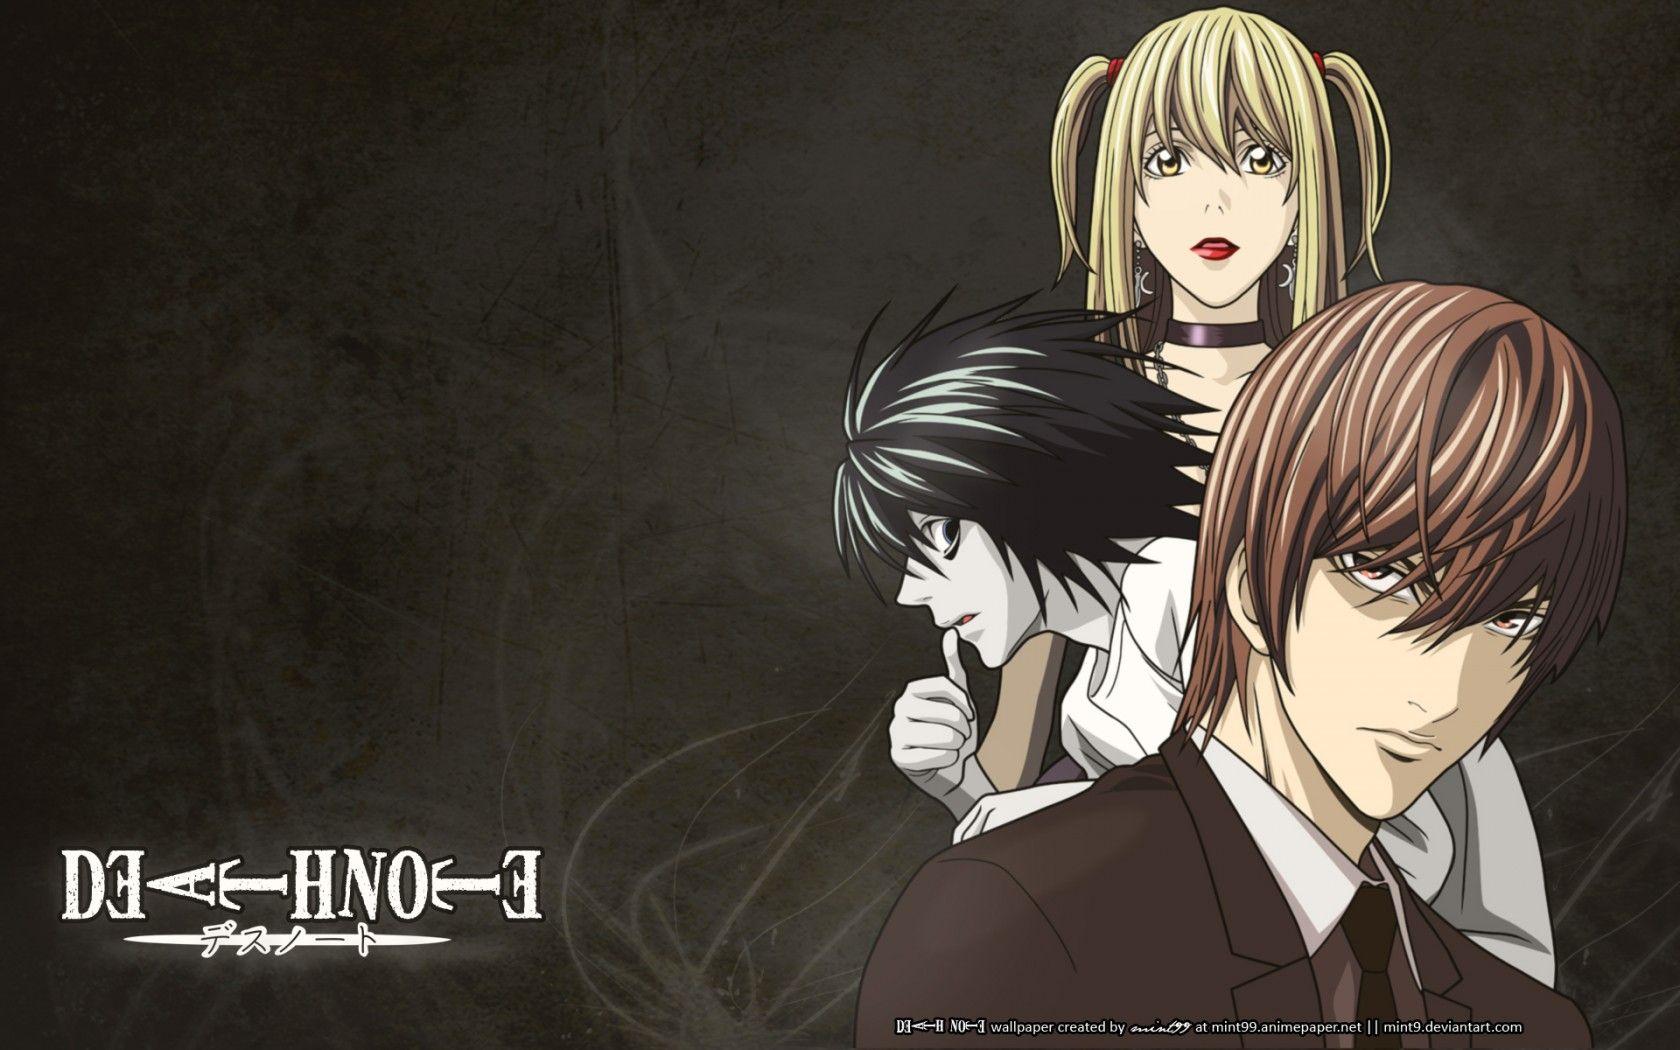 Death Note Series Light Yagami anime groupl girl guy Misa Amane Character L  wallpaper  3593x4800  719787  WallpaperUP